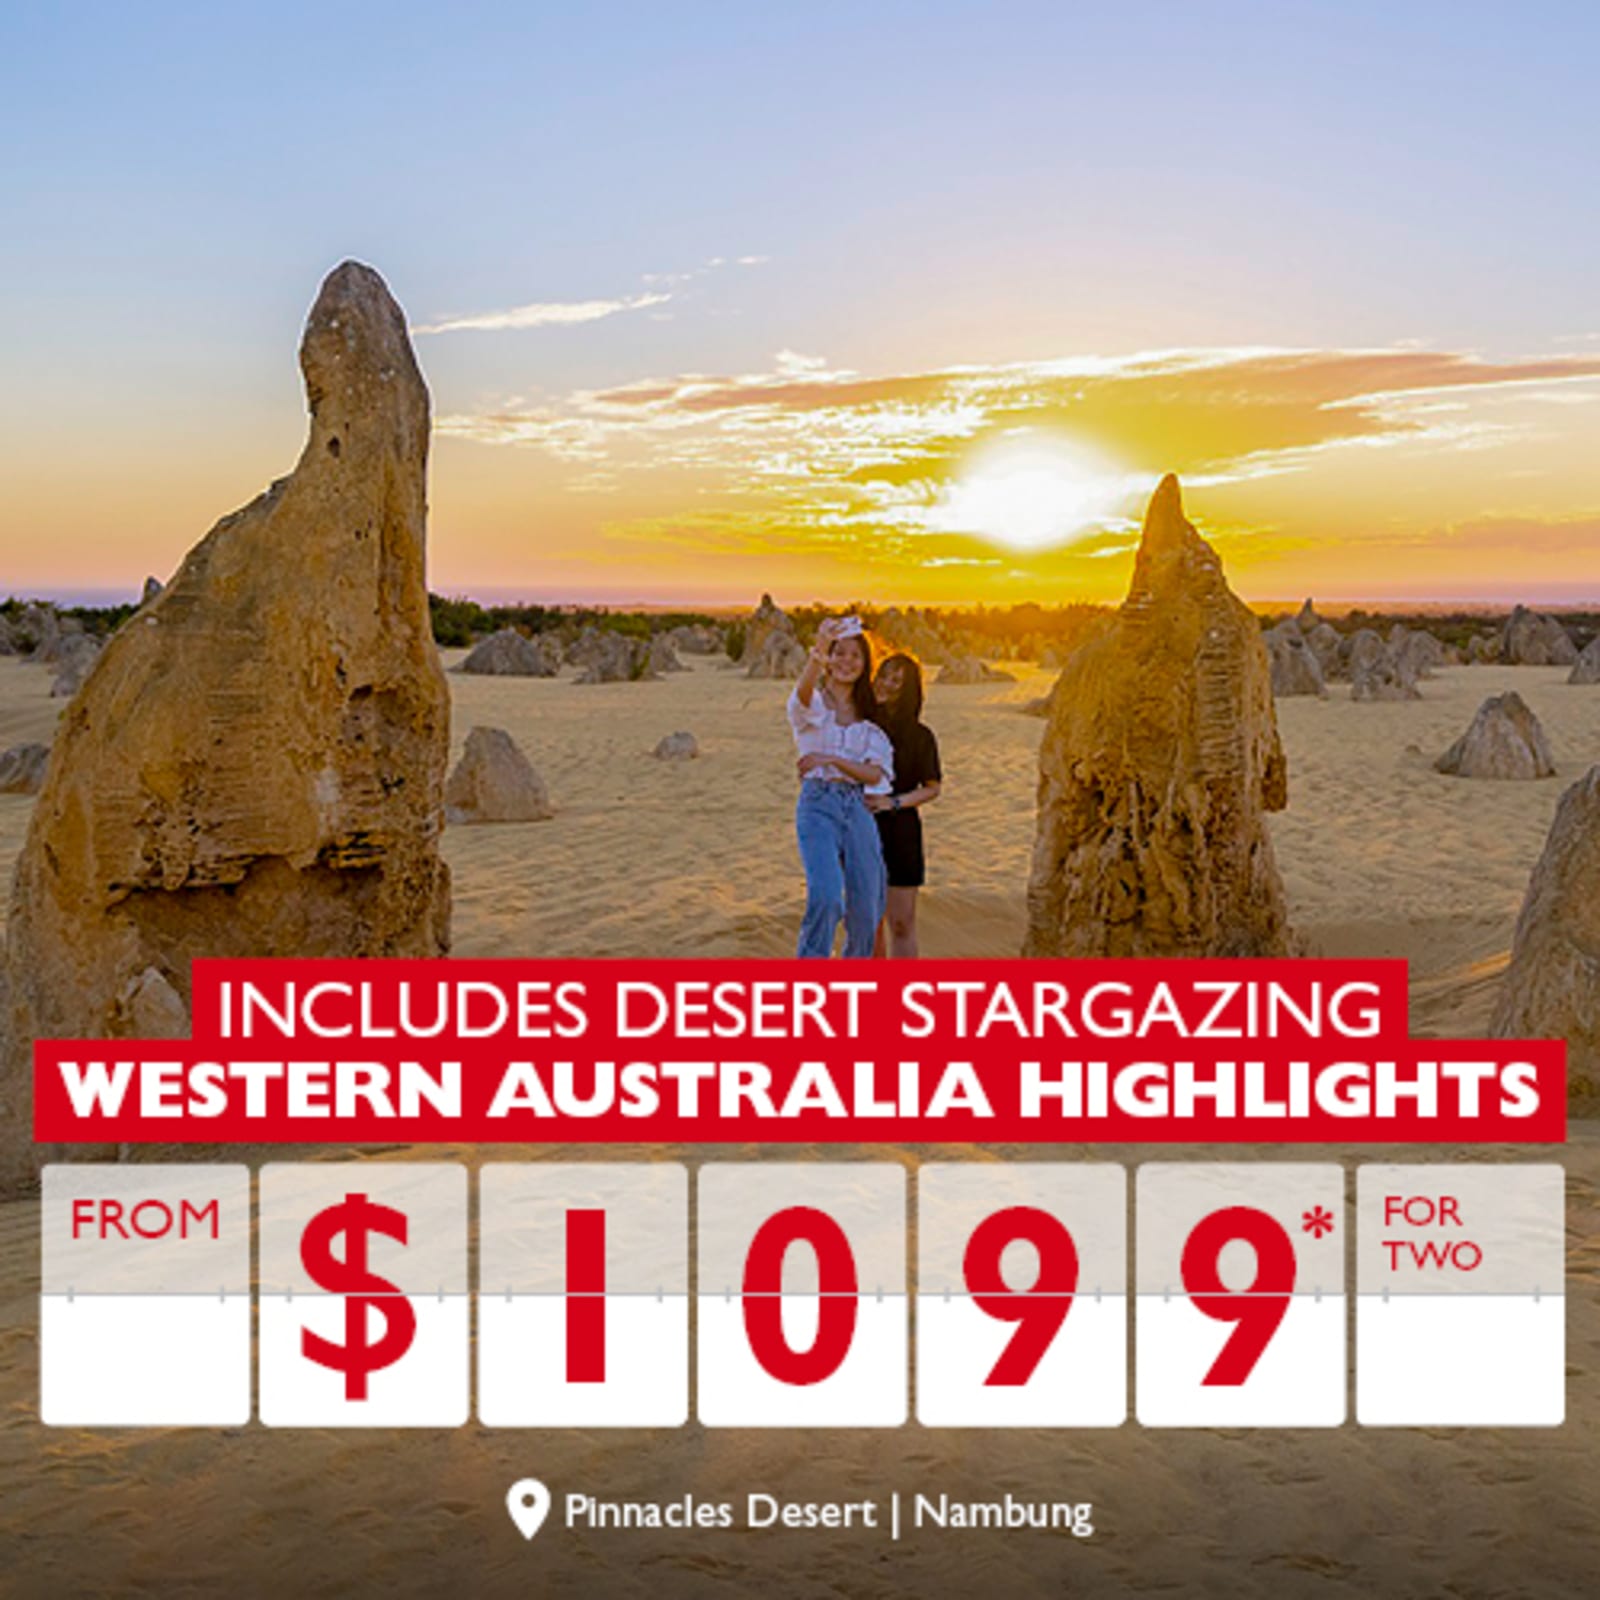 Includes desert stargazing | Western Australia Highlights from $1099* for two